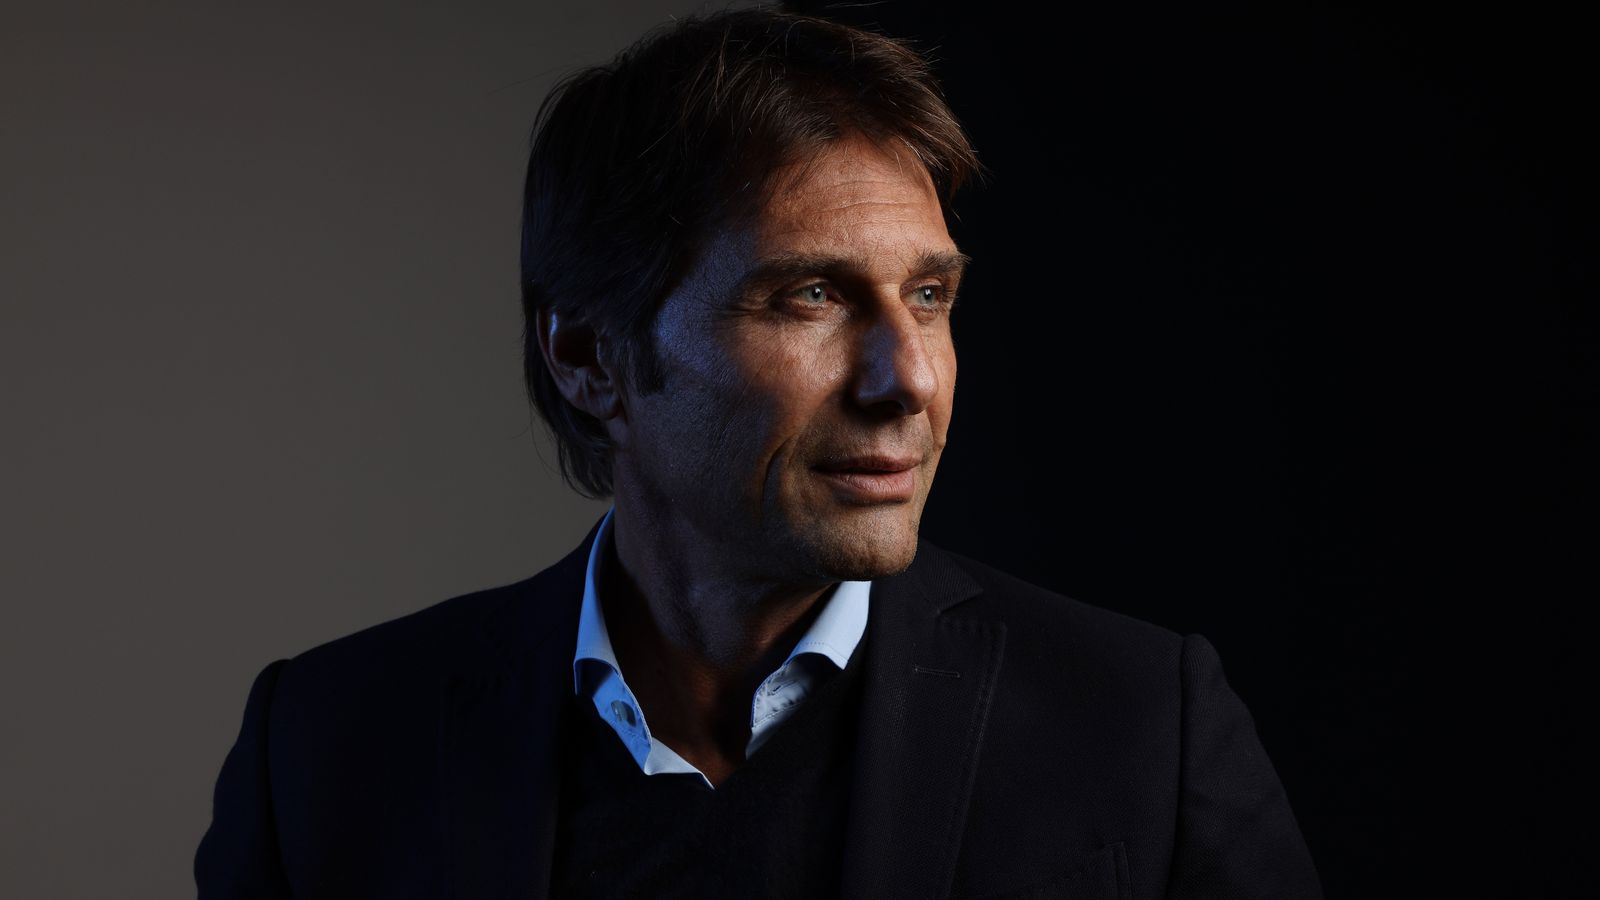 Antonio Conte: Tottenham manager on transfer investment and form